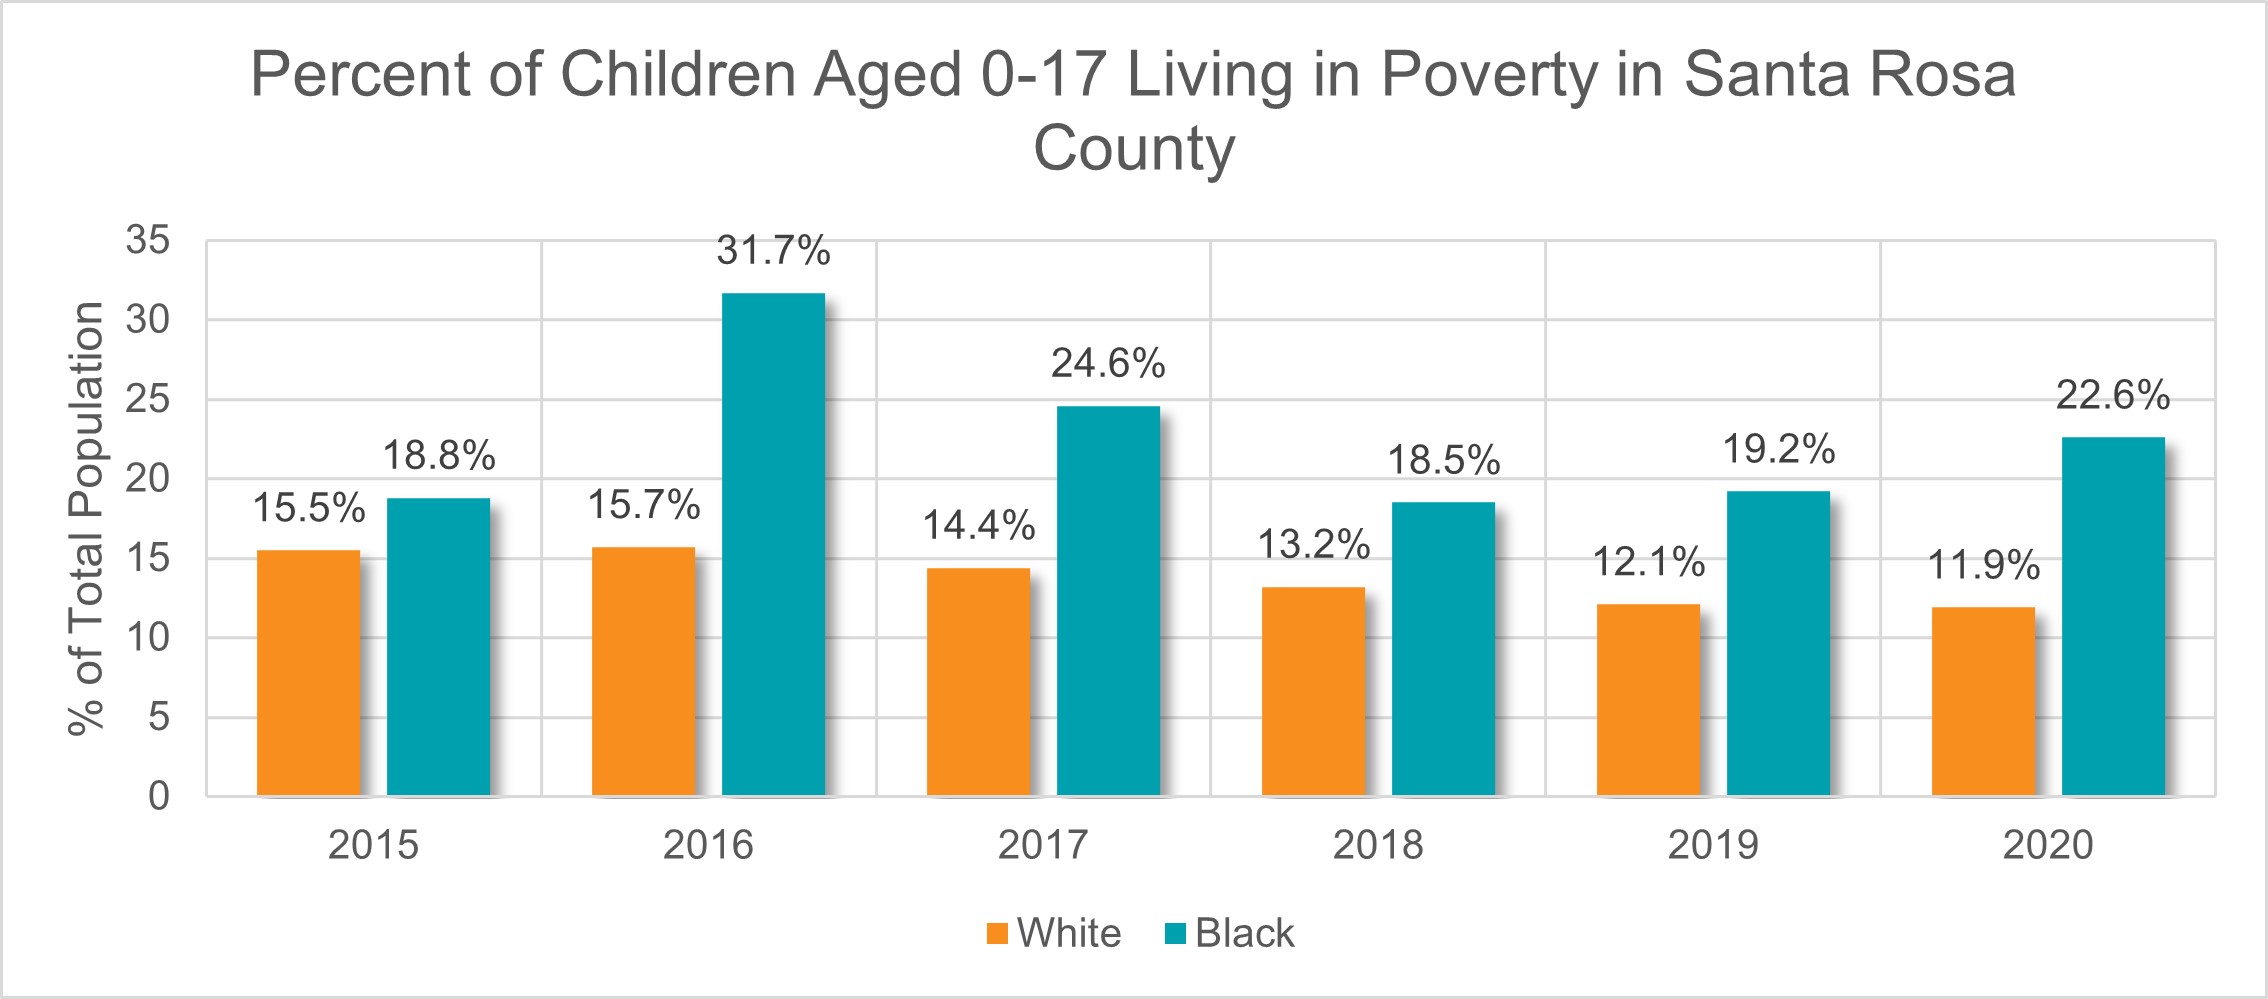 Percent of Children Aged 0-17 Living in Poverty in Santa Rosa County